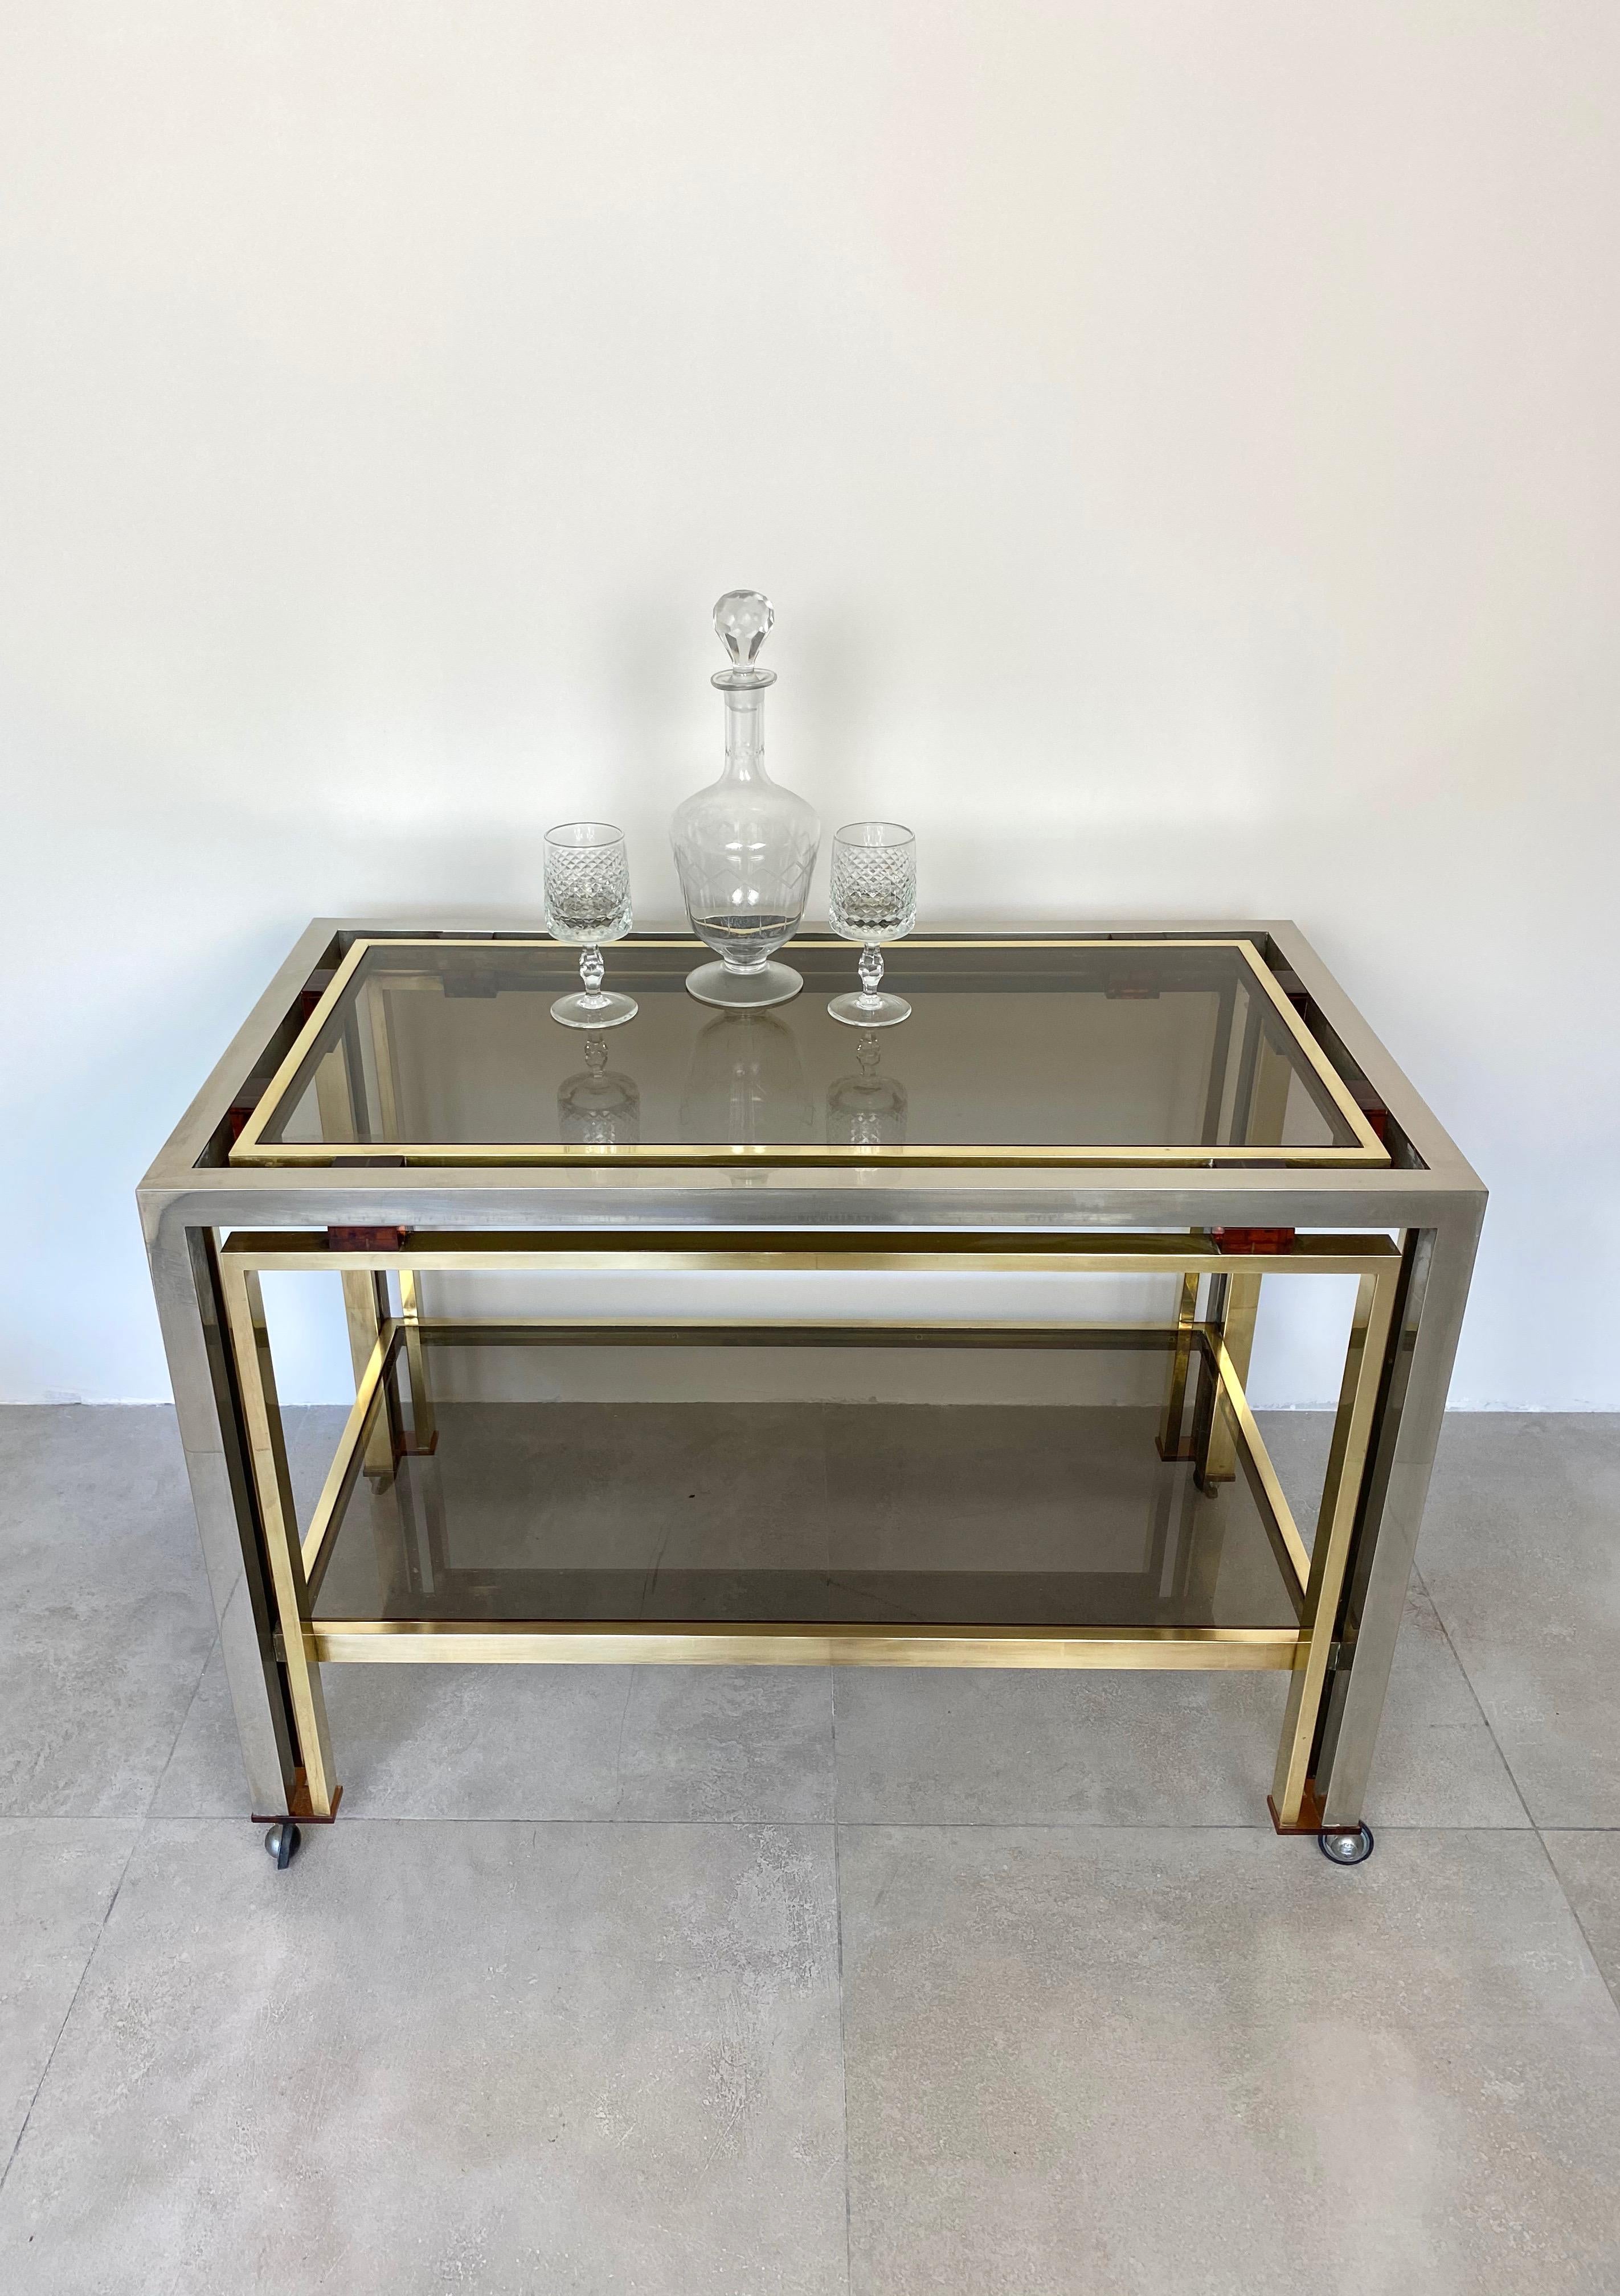 Romeo Rega Cart Table in Chrome, Lucite and Brass, Italy, 1970s For Sale 5